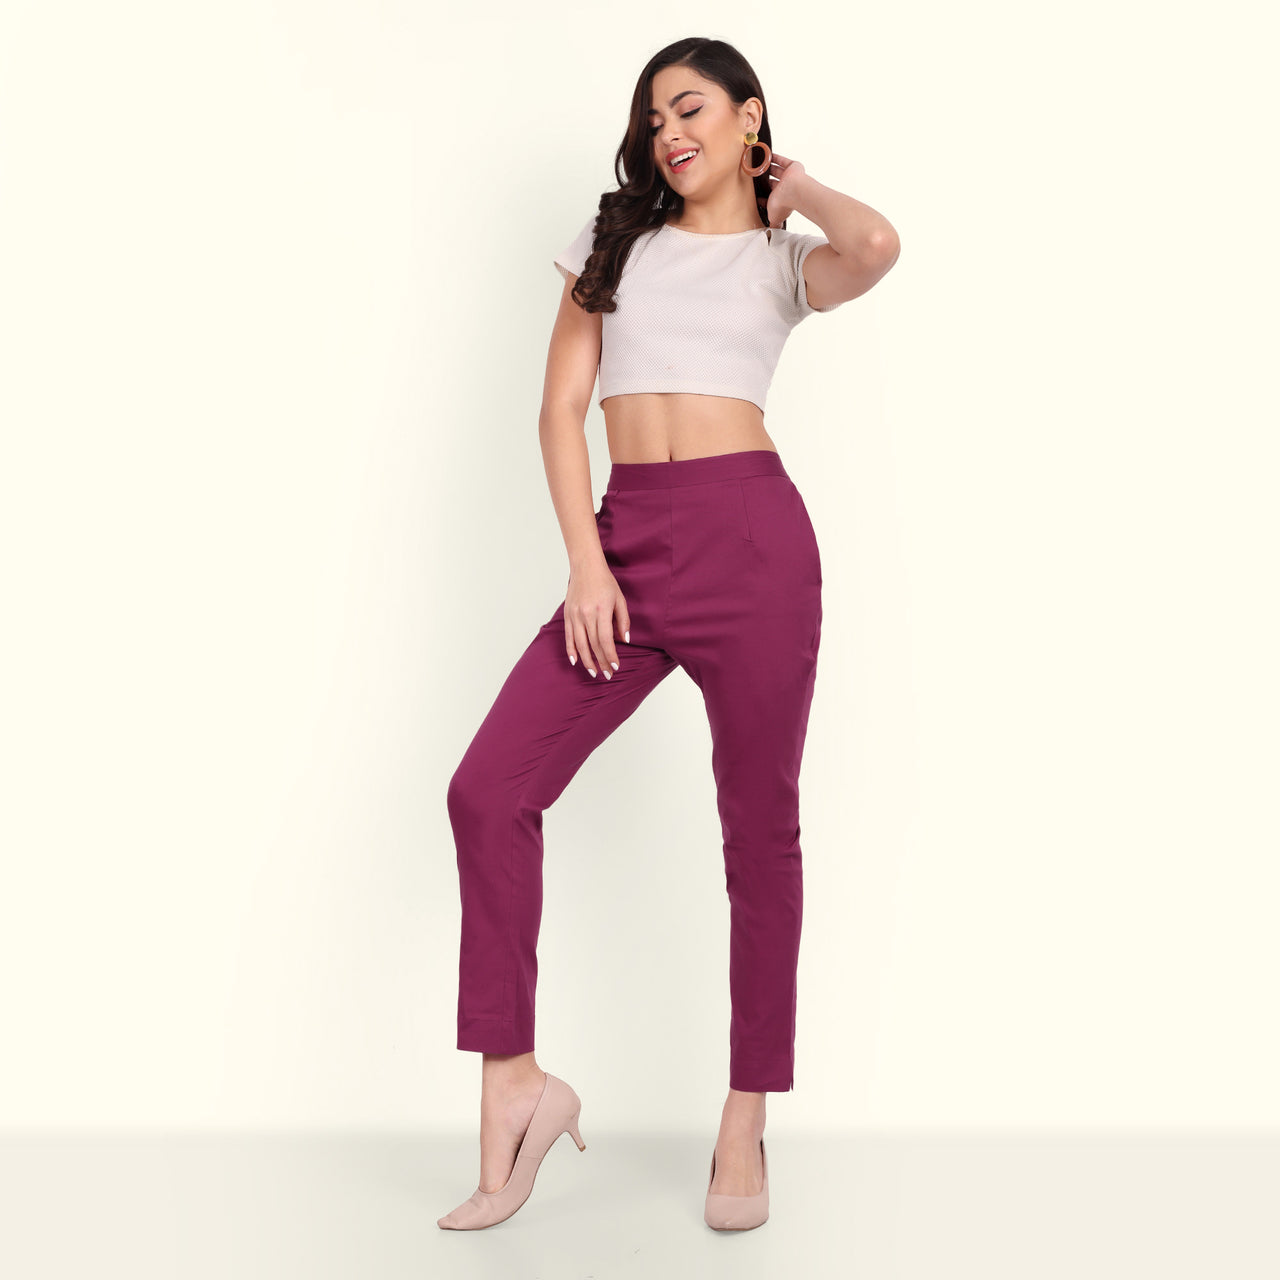 Naariy Rose Taupe Stretchable Cotton Pant